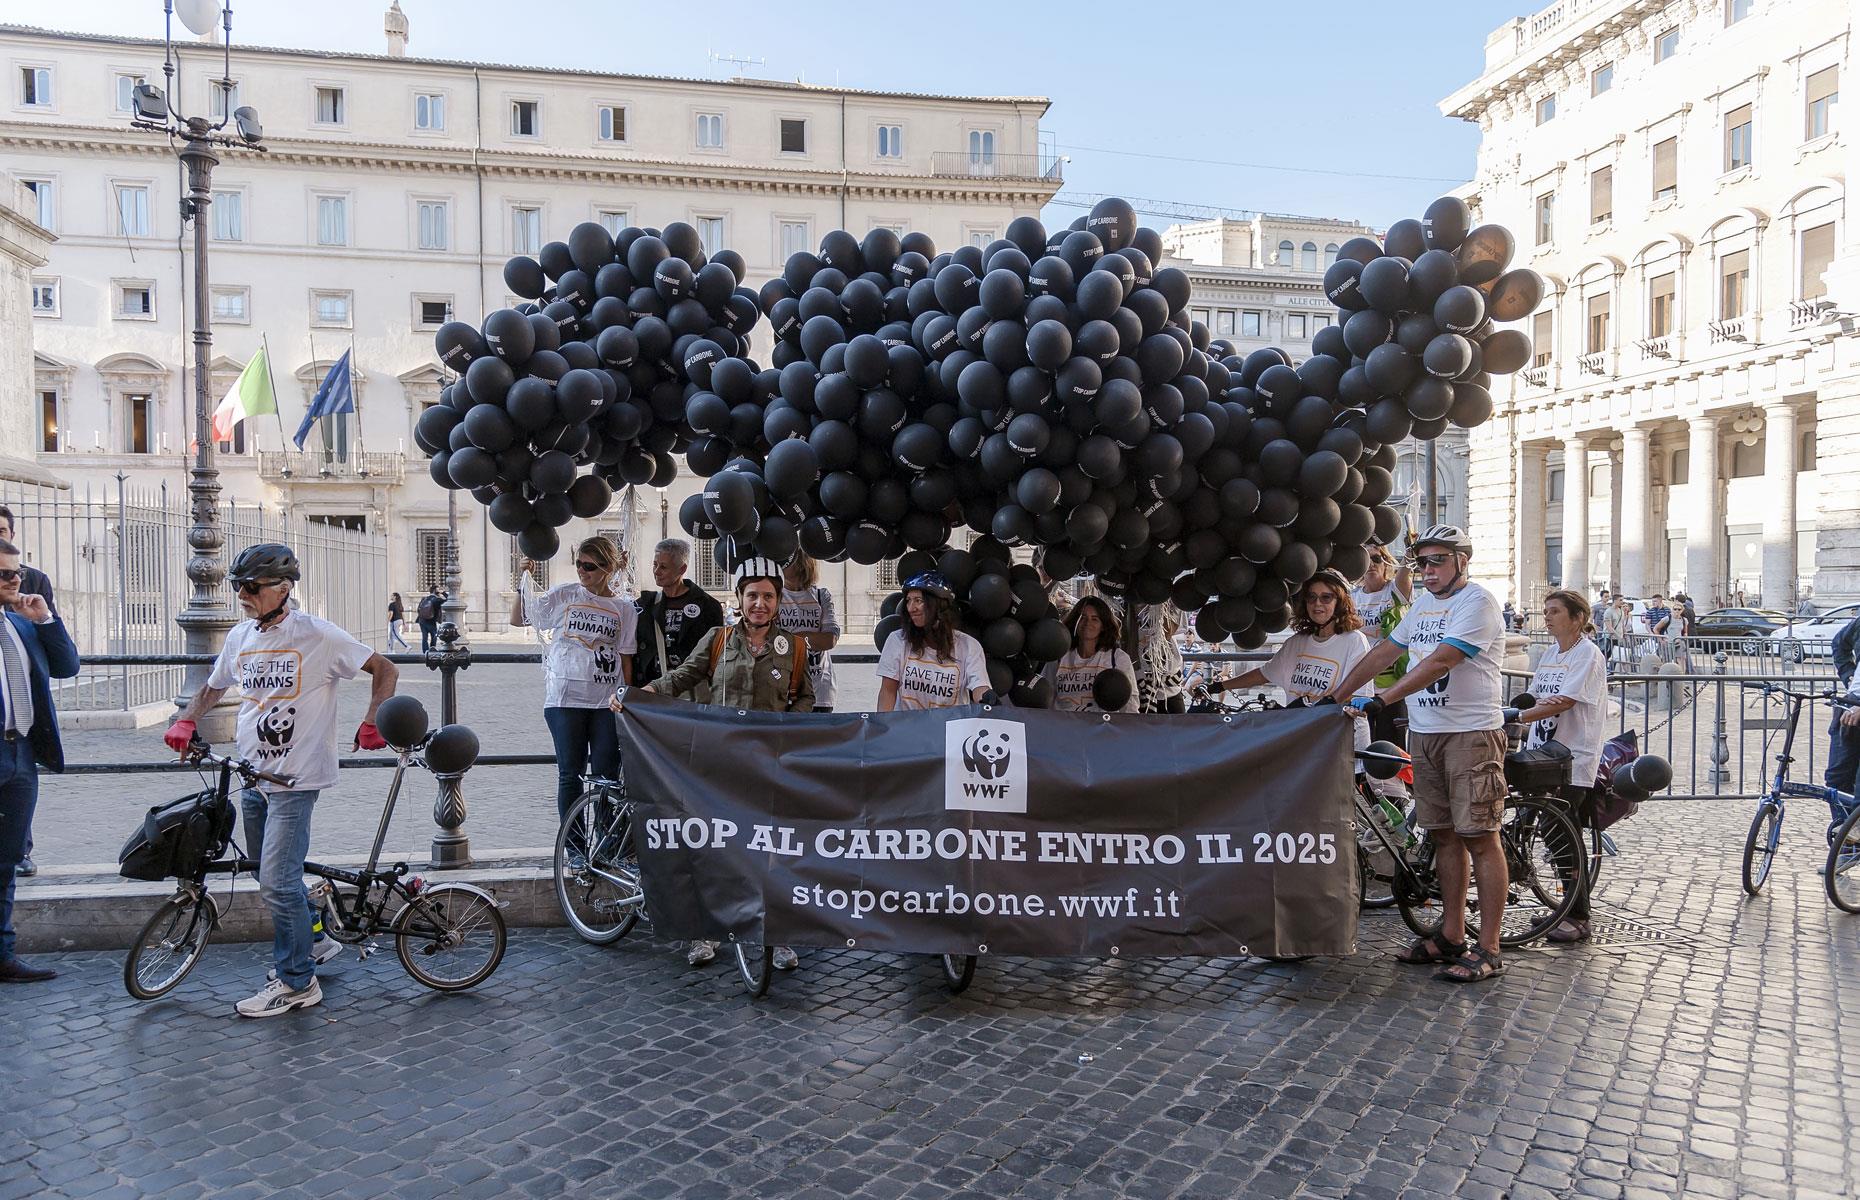 Italy: 82% fossil fuel reliance